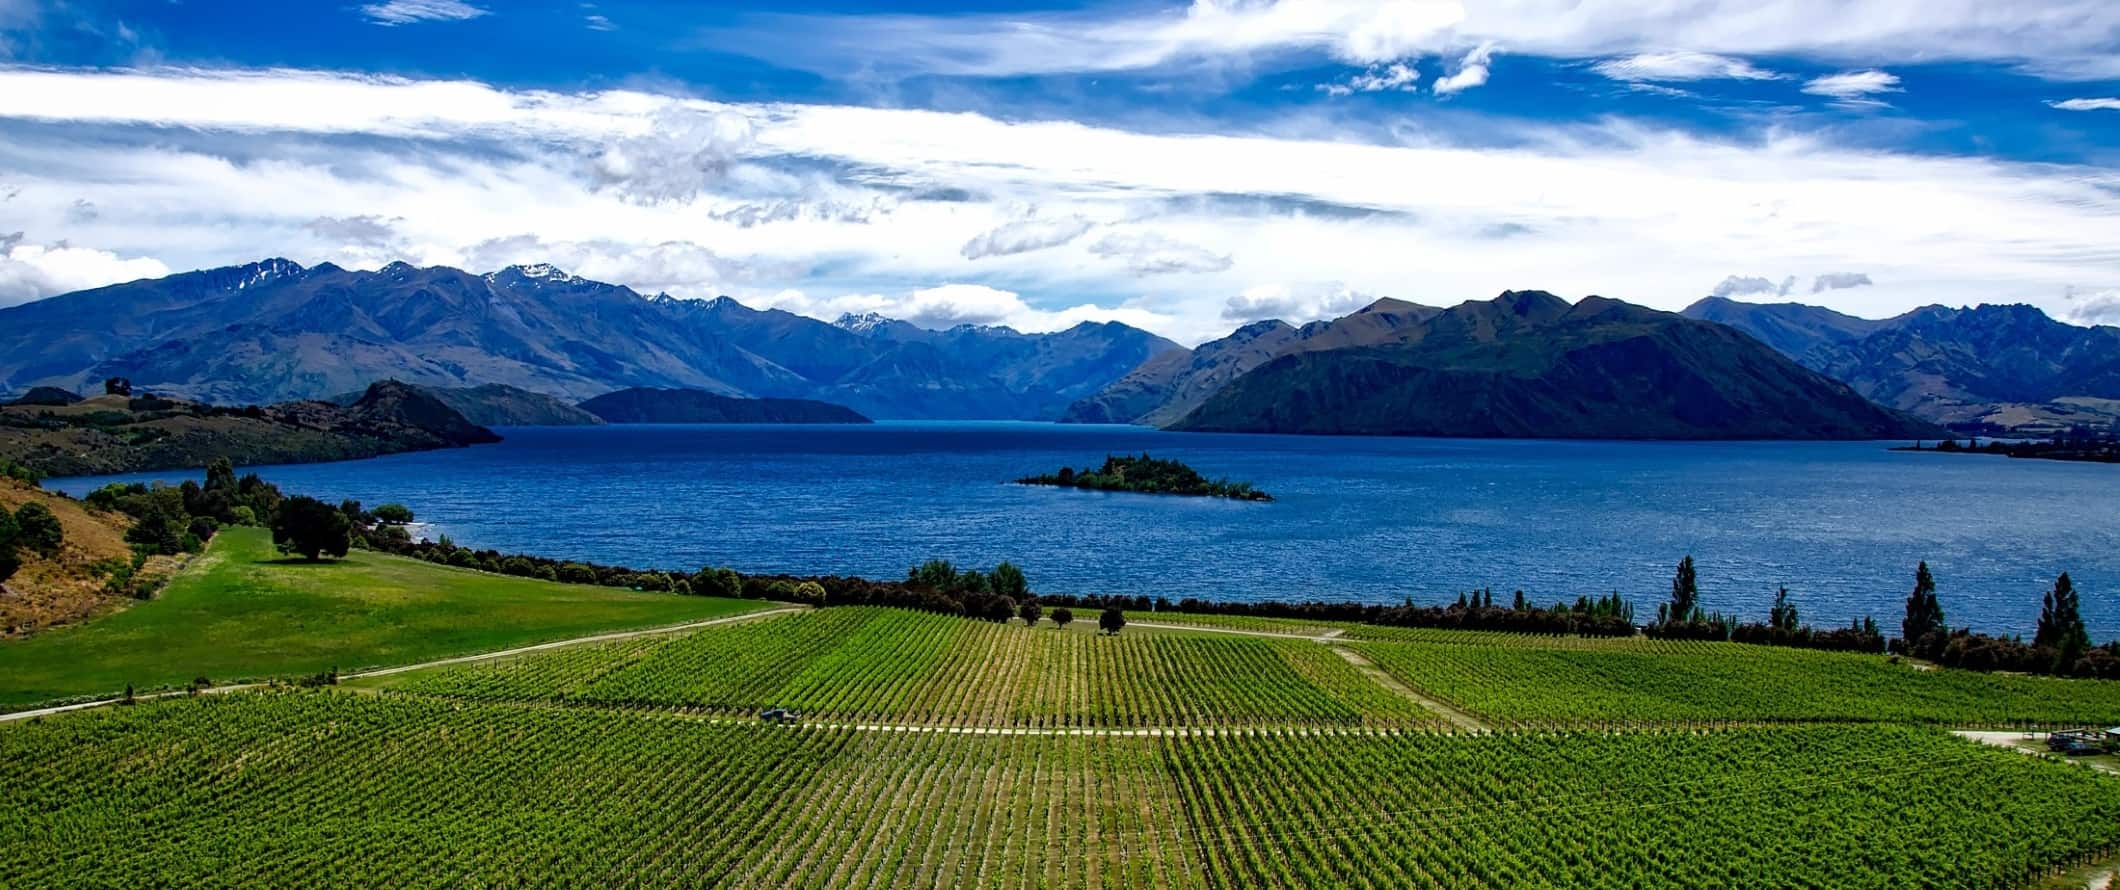 Roys Peak, a famous mountain in the foreground, with mountains and lakes behind it in Wanaka, New Zealand.